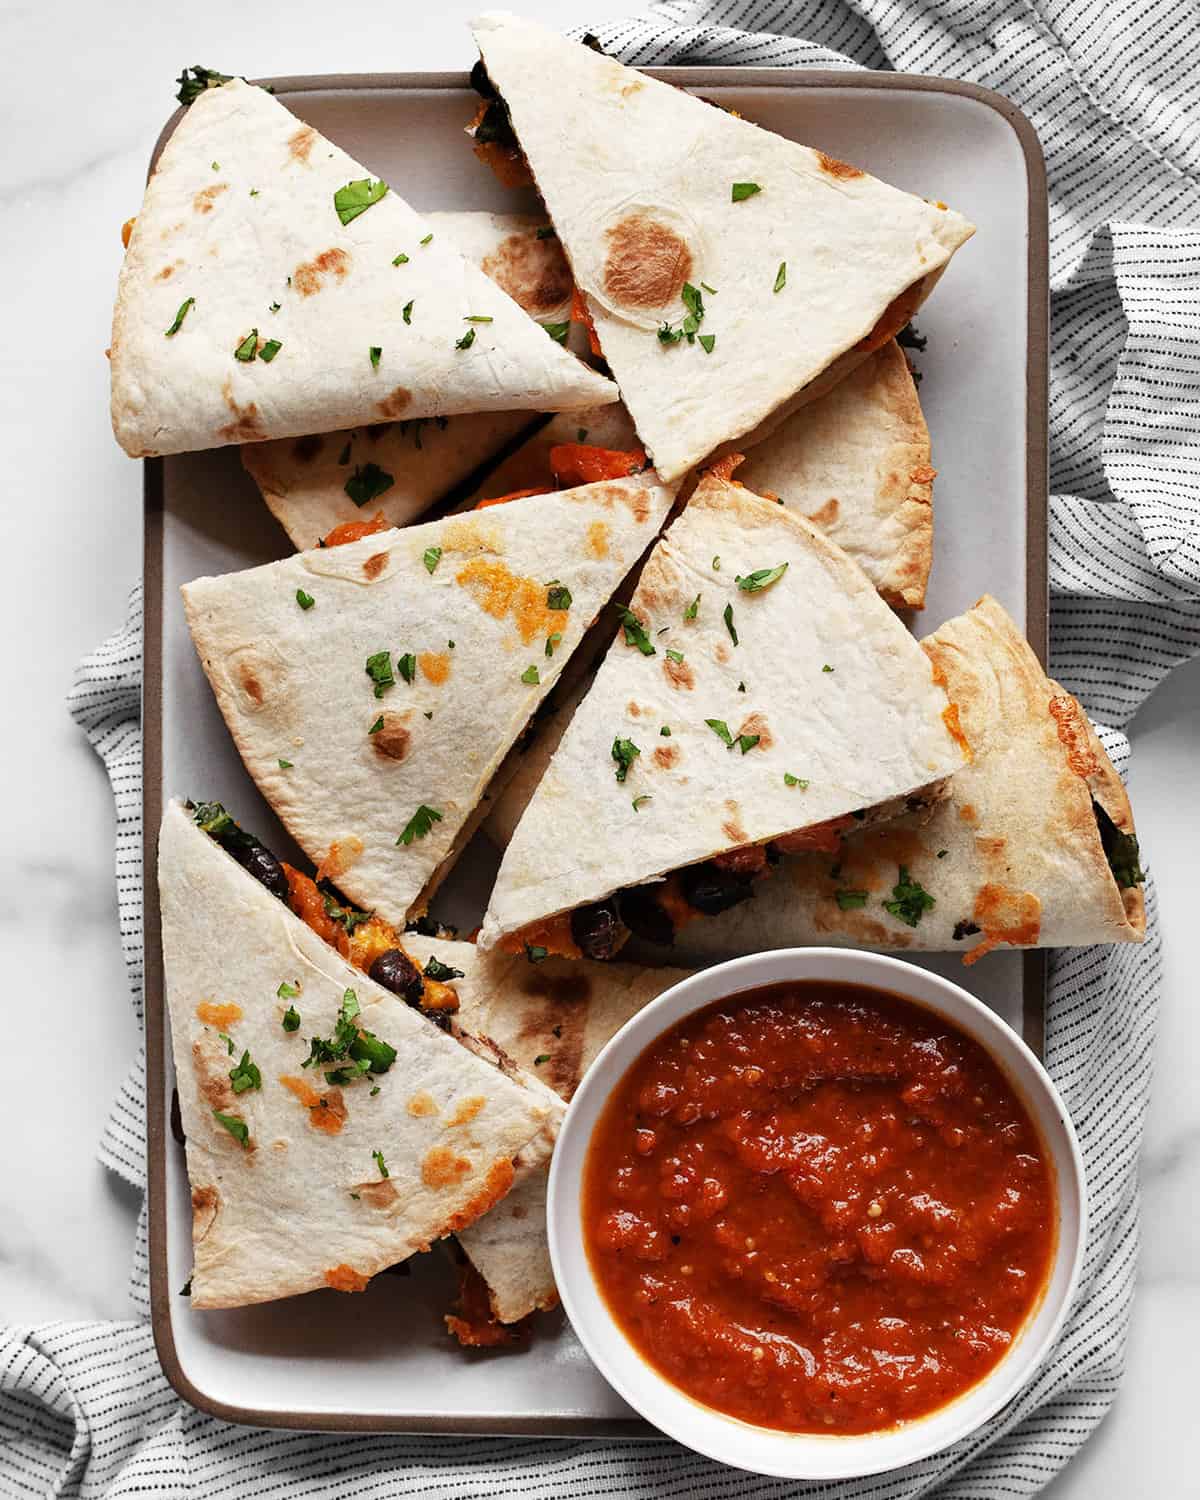 Roasted sweet potato black bean quesadillas cut into wedges on a plate.